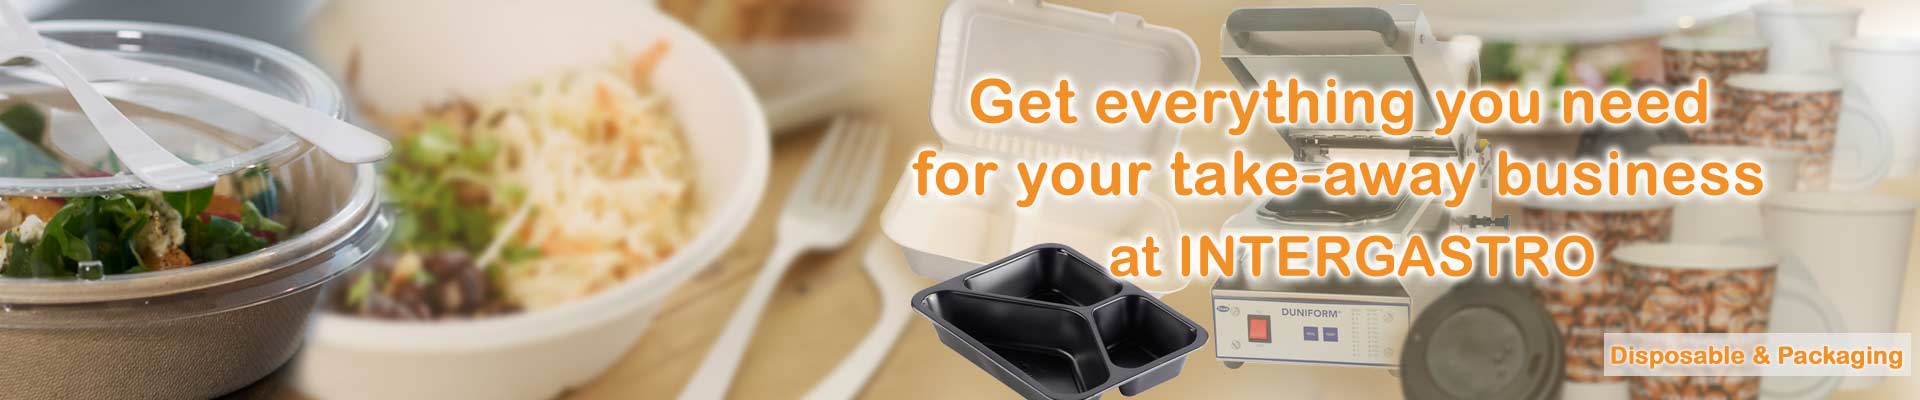 Get everything you need for your take-away business at INTERGASTRO